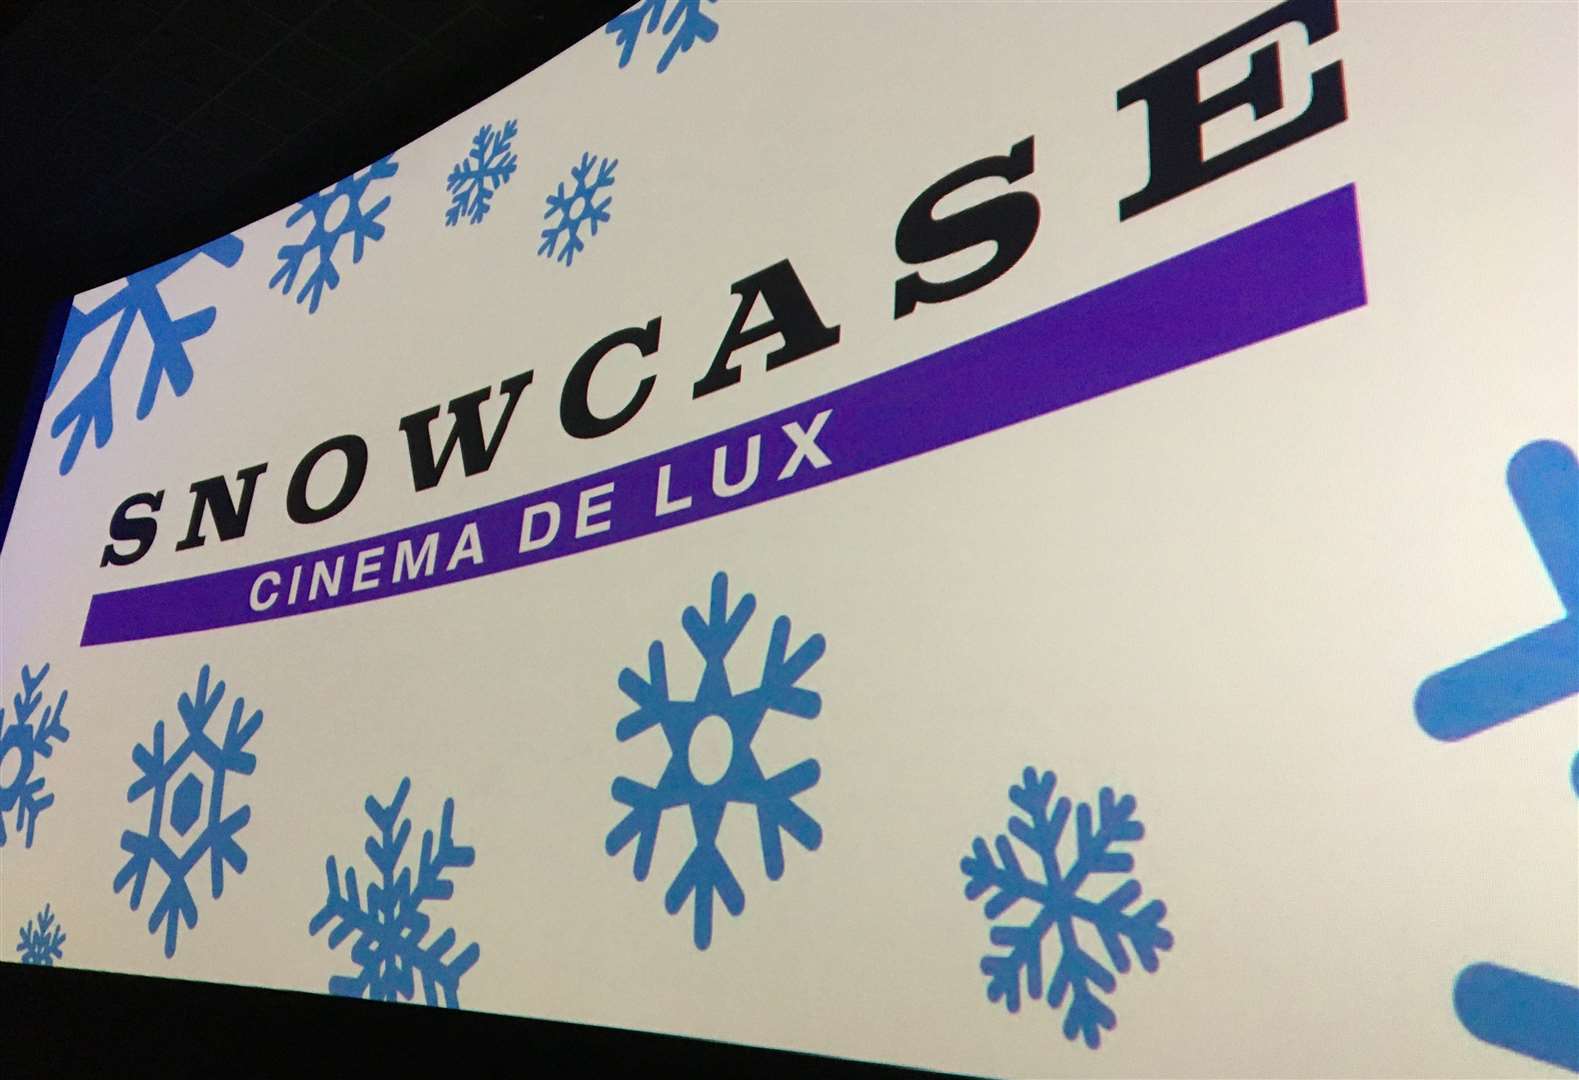 Showcase cinema in Bluewater becomes Snowcase for one day